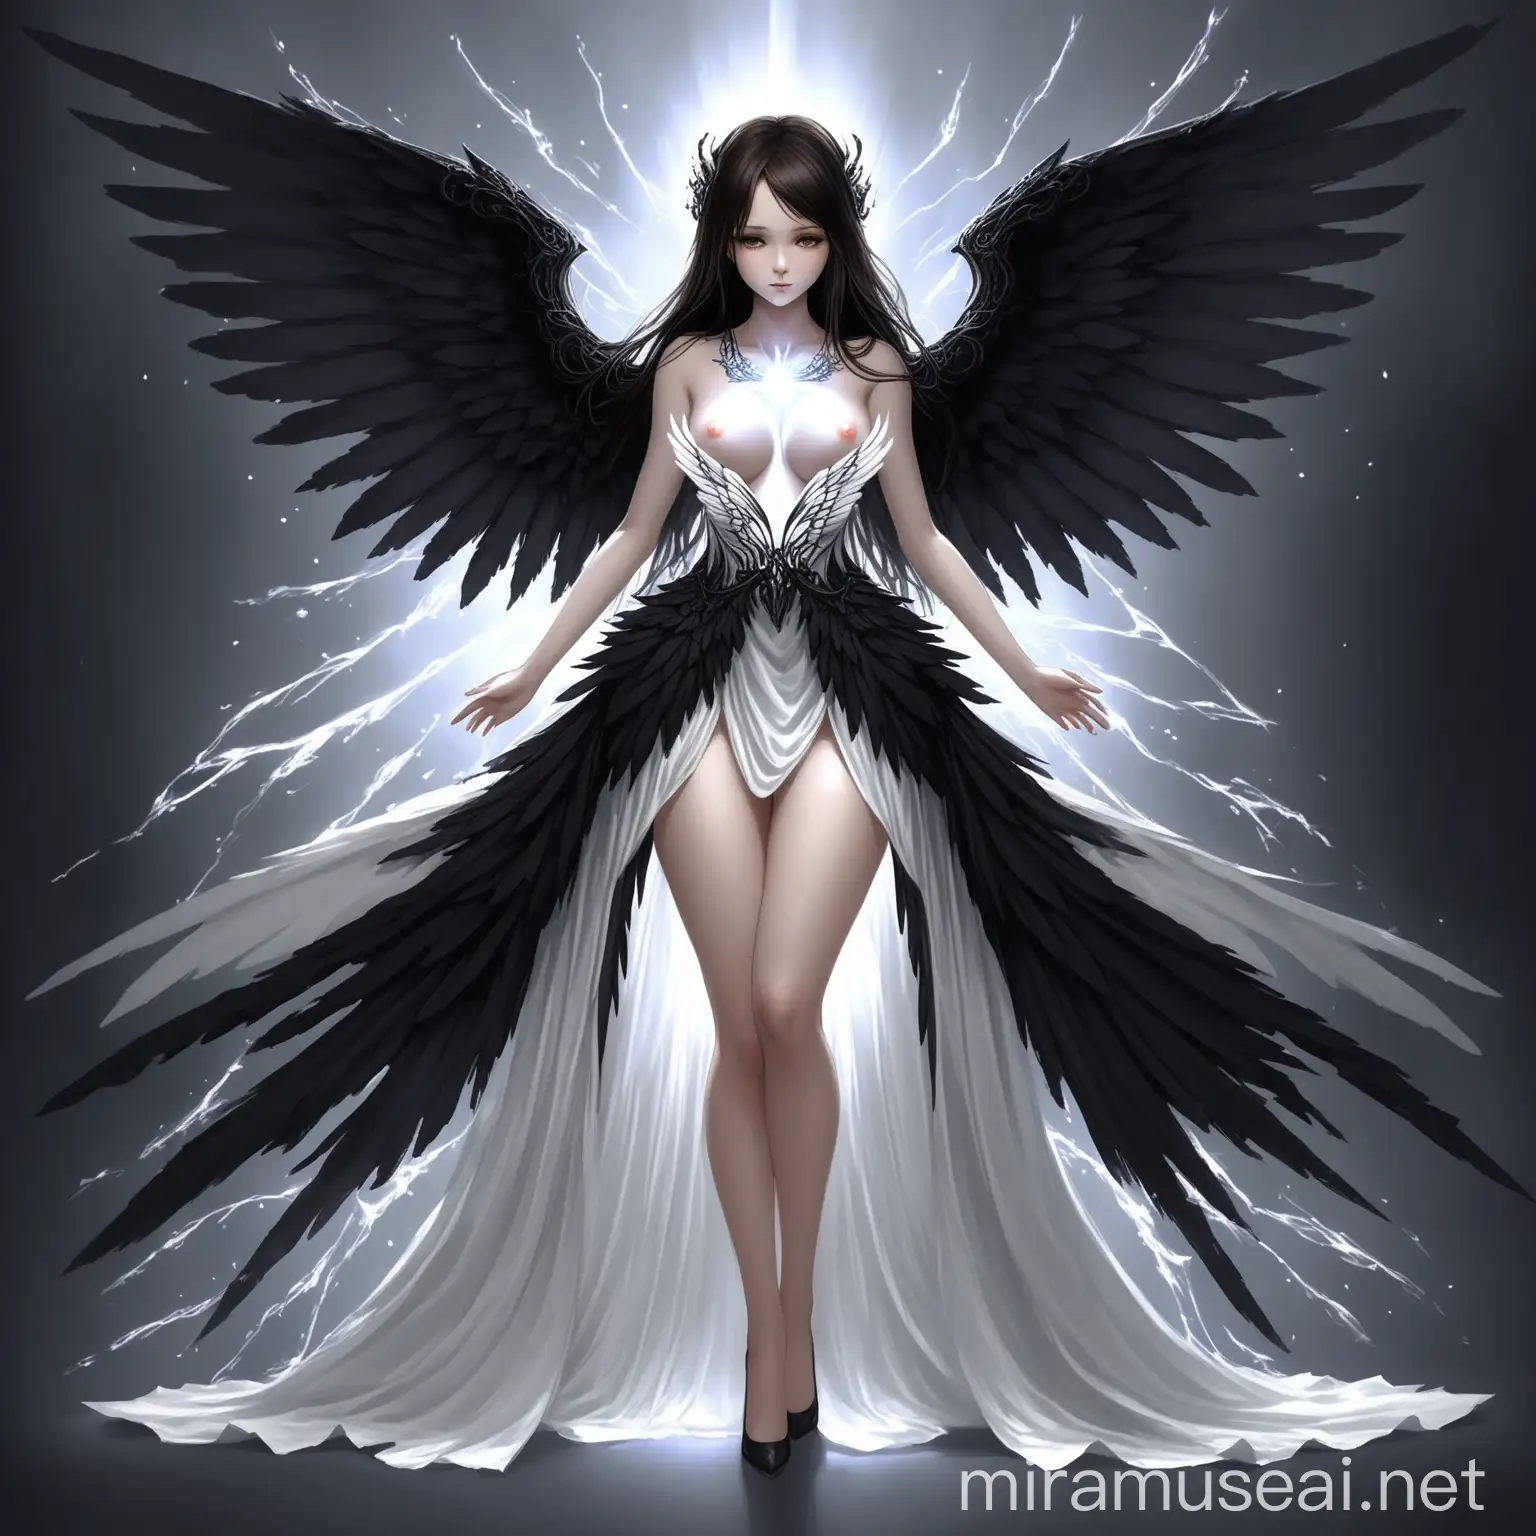 Ethereal Maiden with Energy and Darkness Wings in Elegant Monochrome Attire